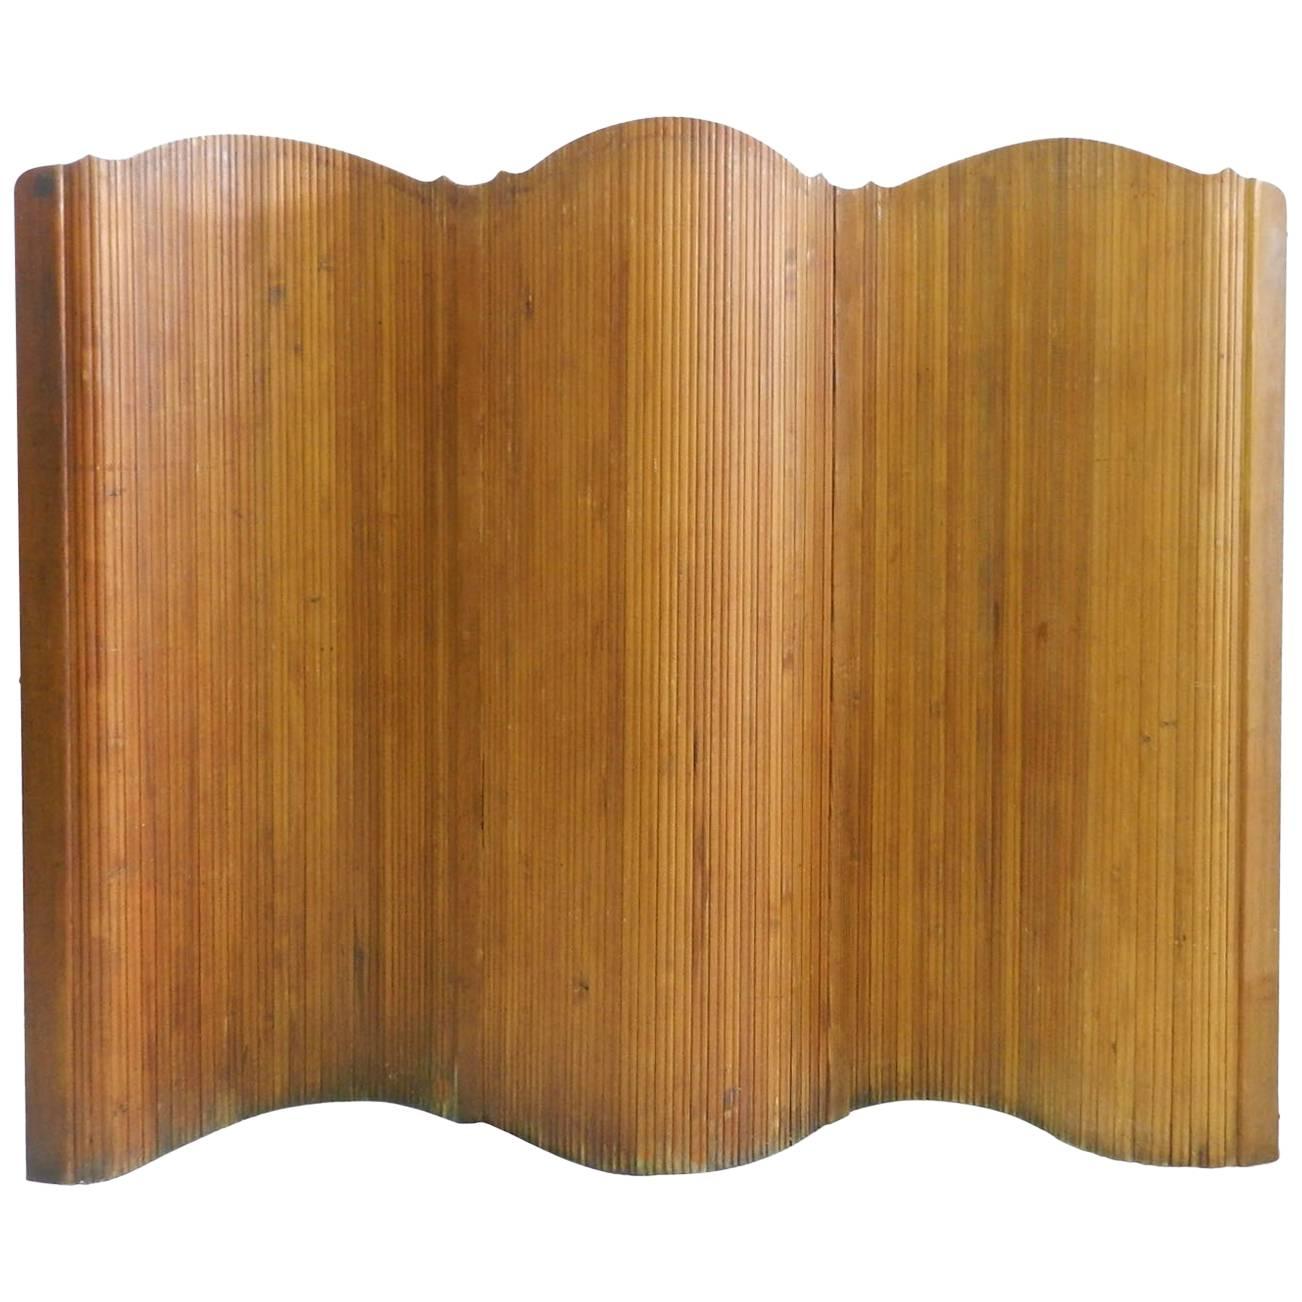  French Room Divider Wood Roll up Screen by S.N.S.A Midcentury Art Deco